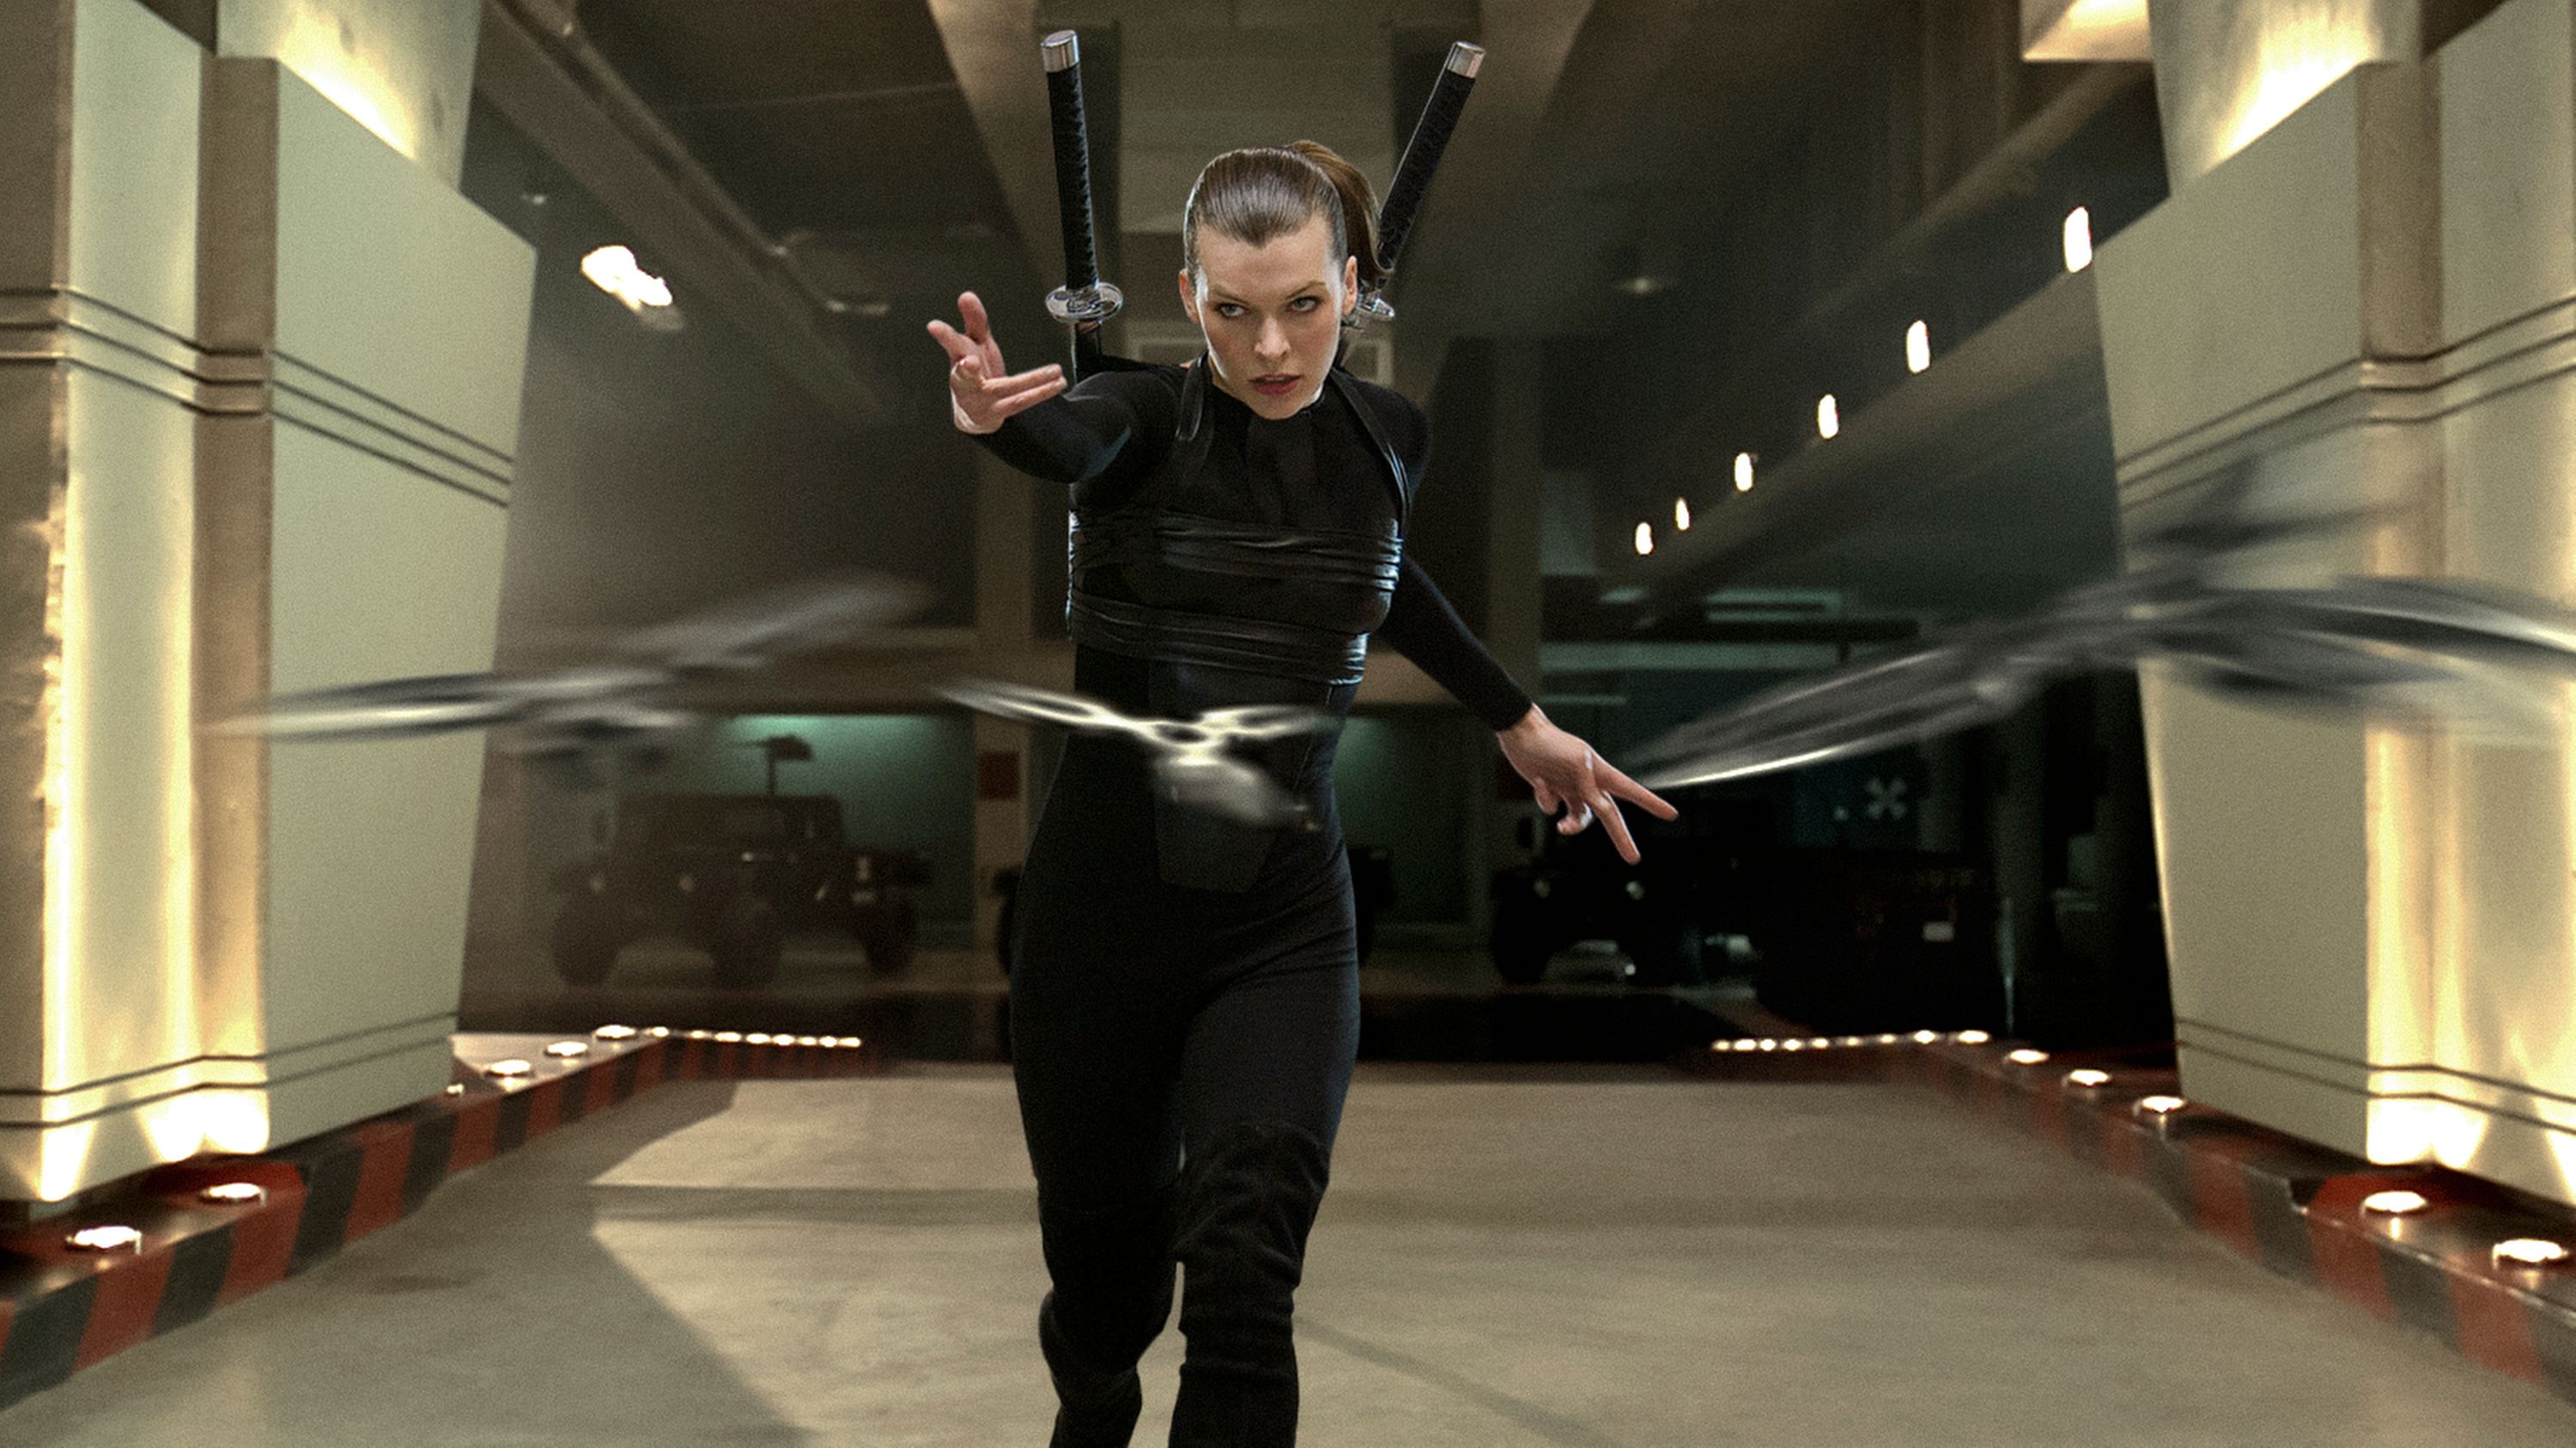 Milla Jovovich stars as Alice in Resident Evil: Afterlife